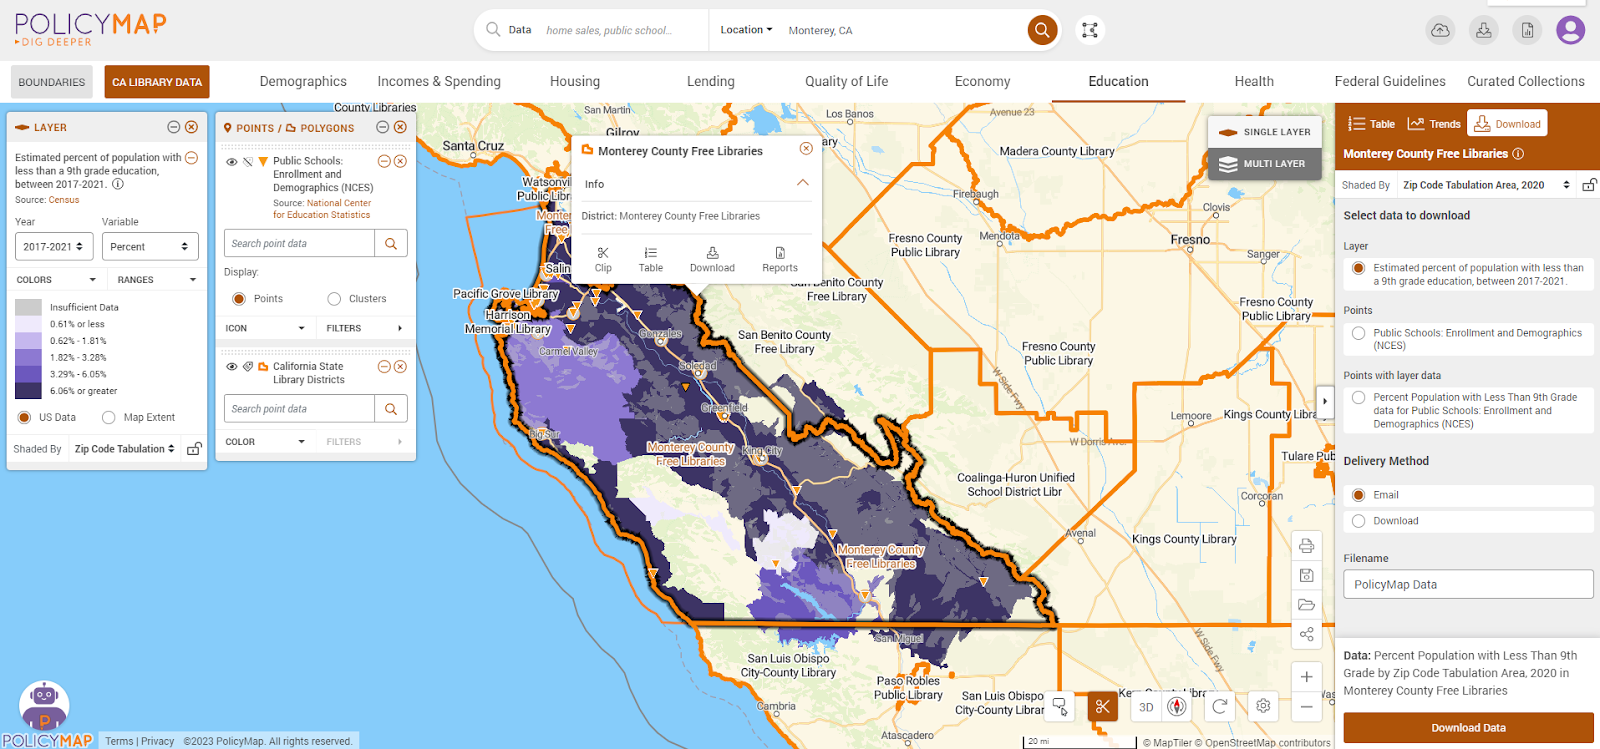 PolicyMap portal map with an outline of Monterey County Free Library service area and educational attainment. (Data available for download in PolicyMap)